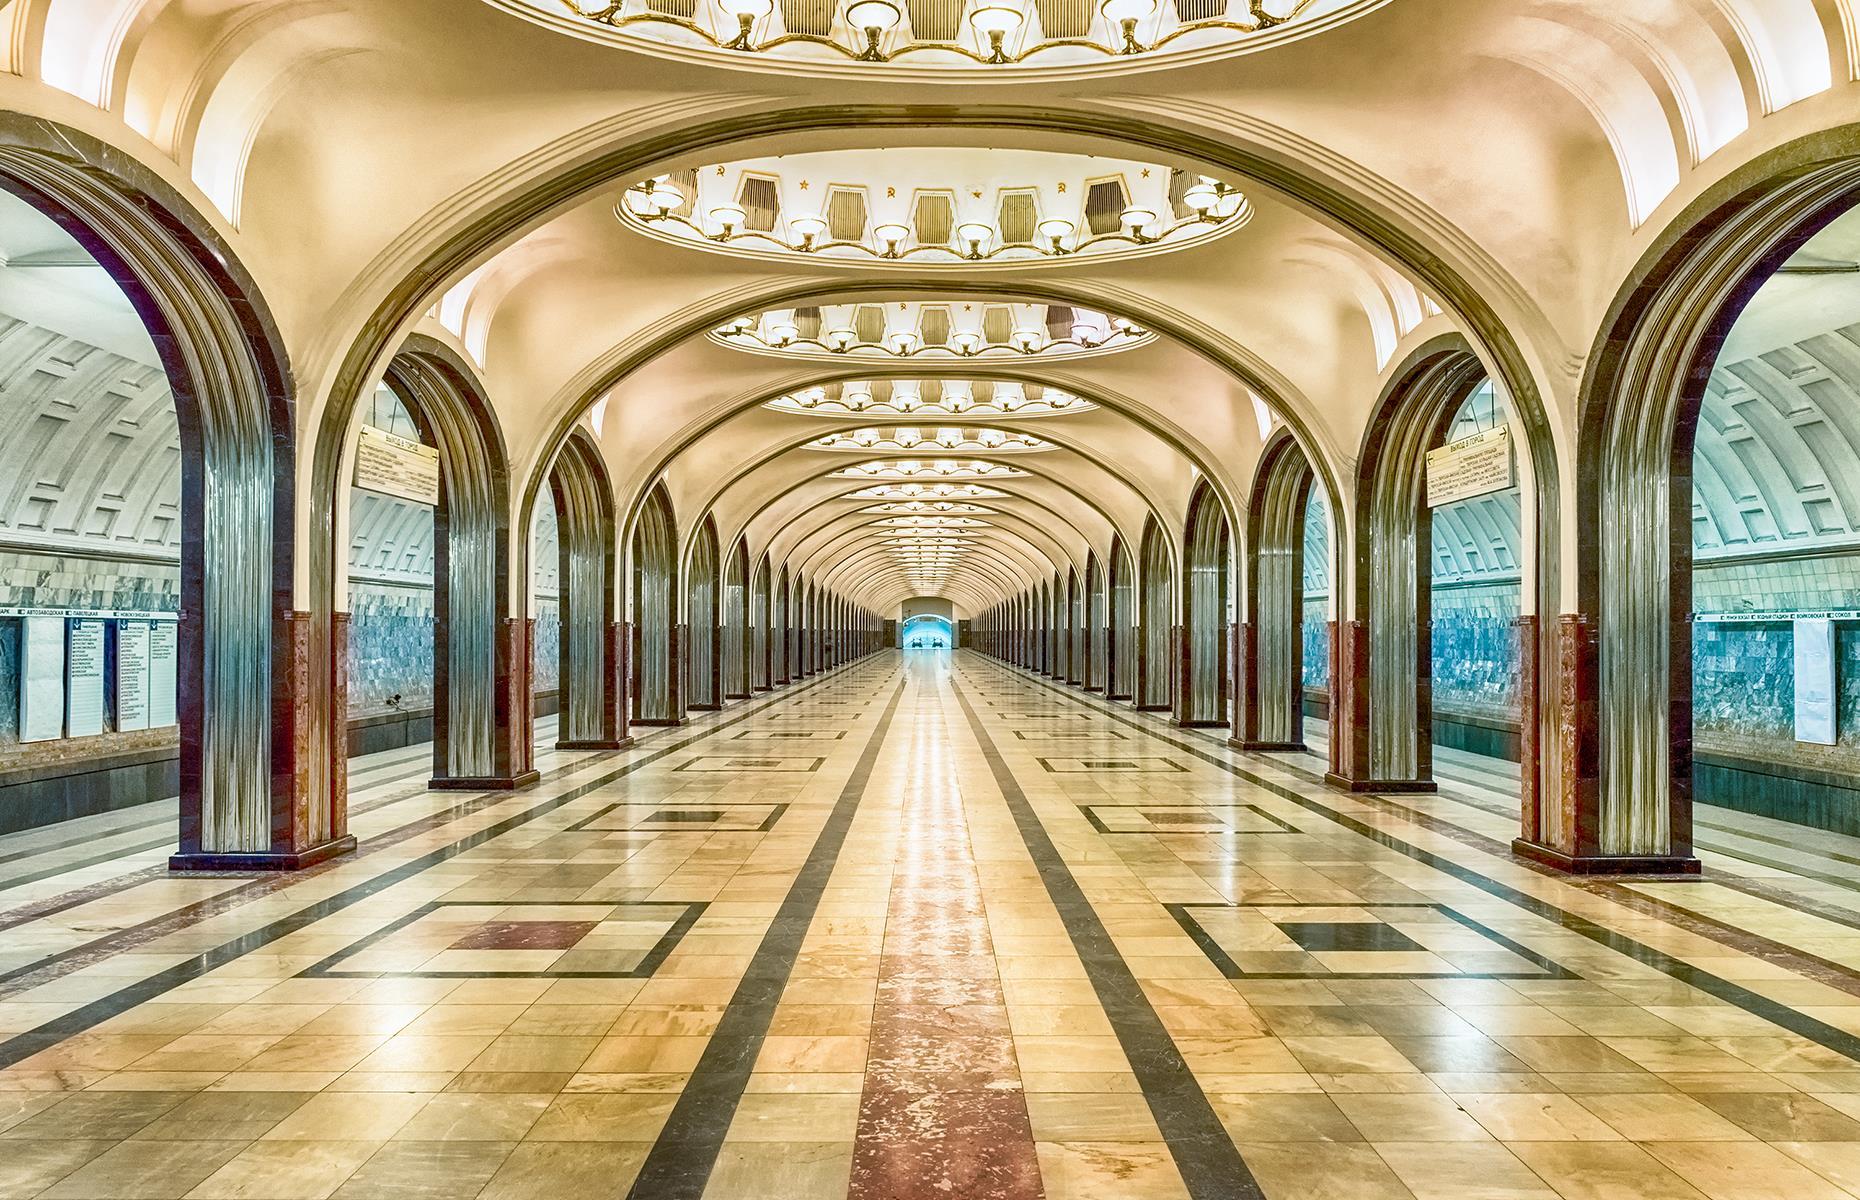 Others, like this station in central Moscow, were simply designed to show off. Mayakovskaya is a great example of pre-Second World War Stalinist architecture and is a nod to the Russian Futurist movement and one of its central figures Vladimir Mayakovsky.